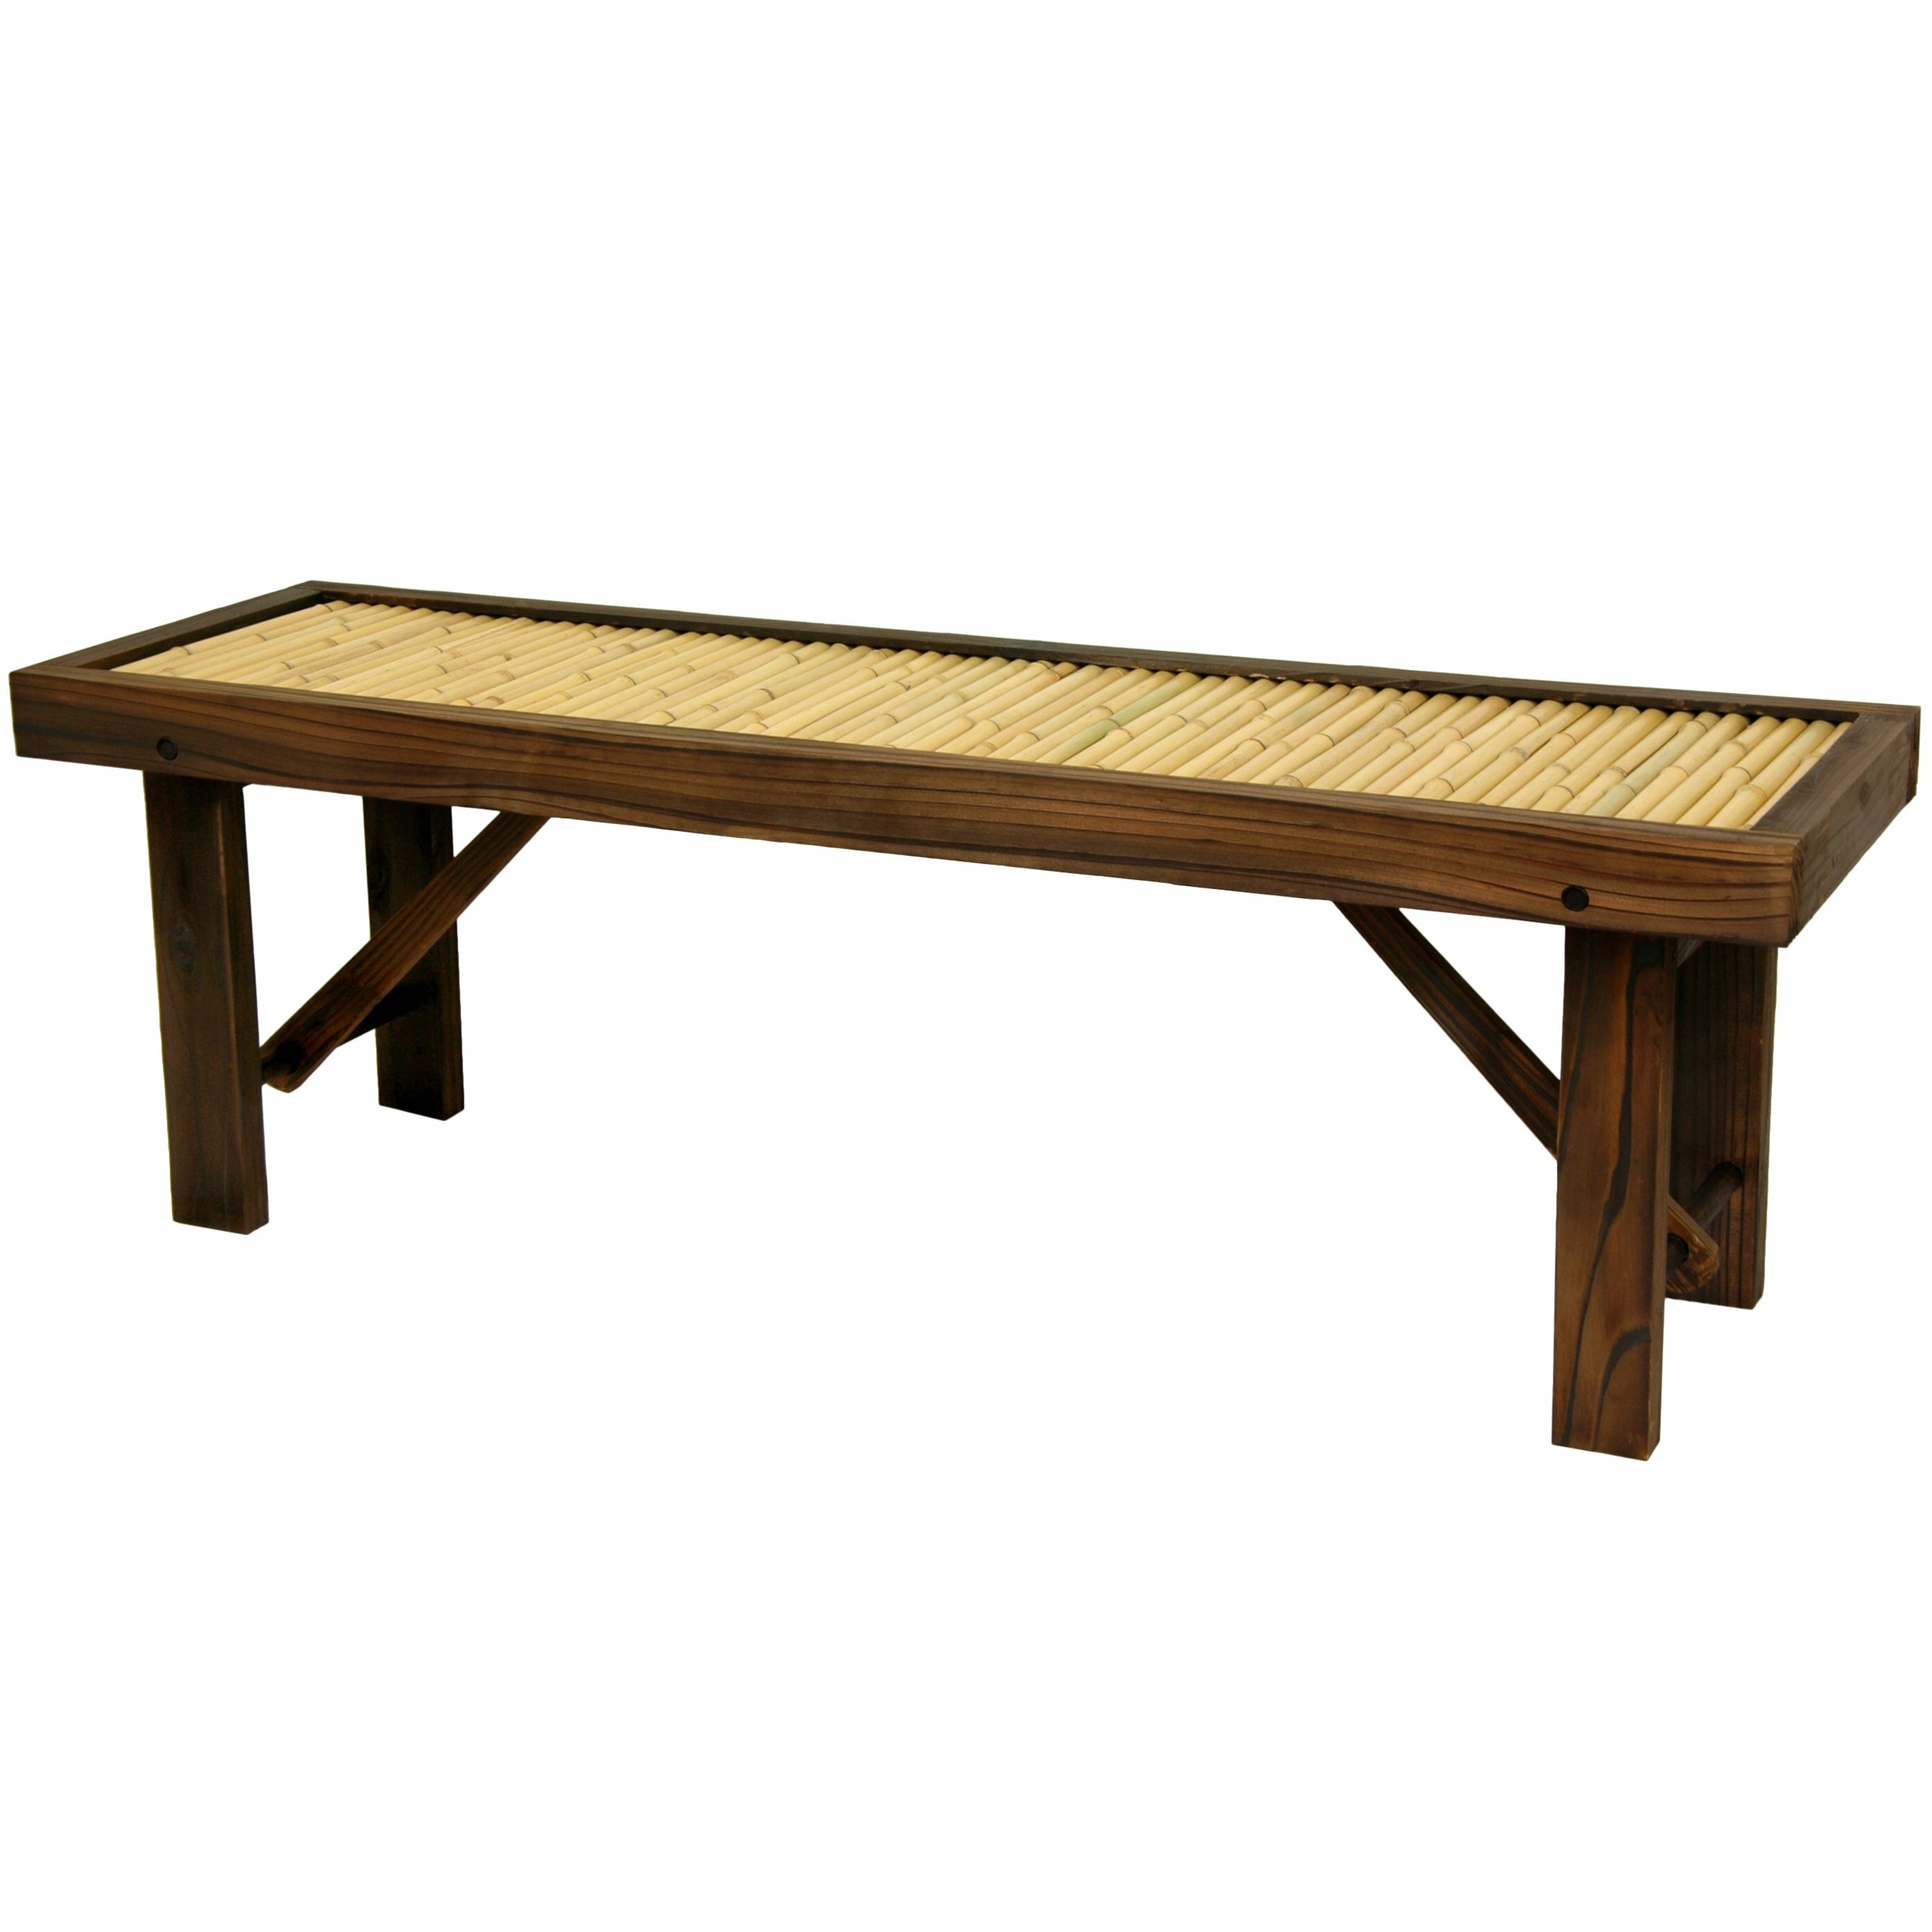 Oriental Furniture Japanese Bamboo Bench with Wood Frame